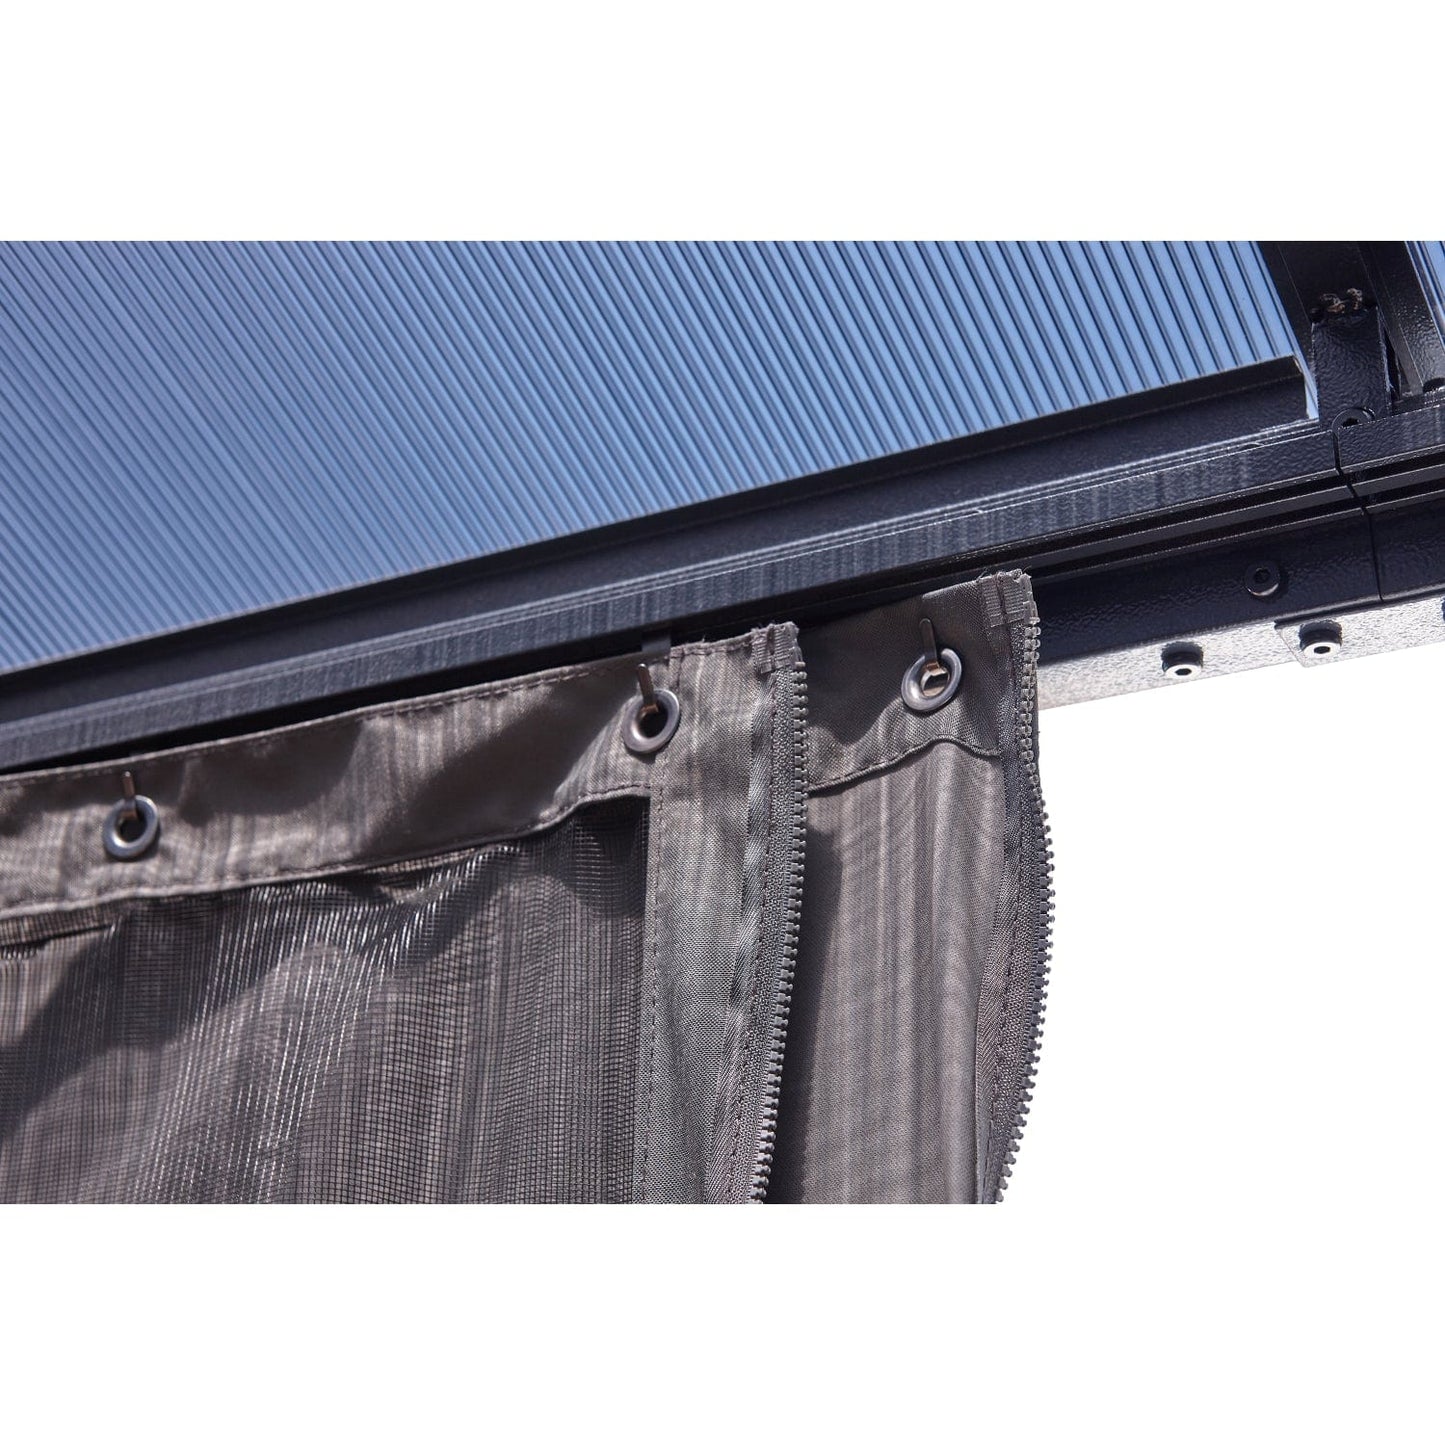 SOJAG Gazebo Accessories Sojag | Turia Grey Polyester Curtains 10 ft. x 12 ft. 135-9168914